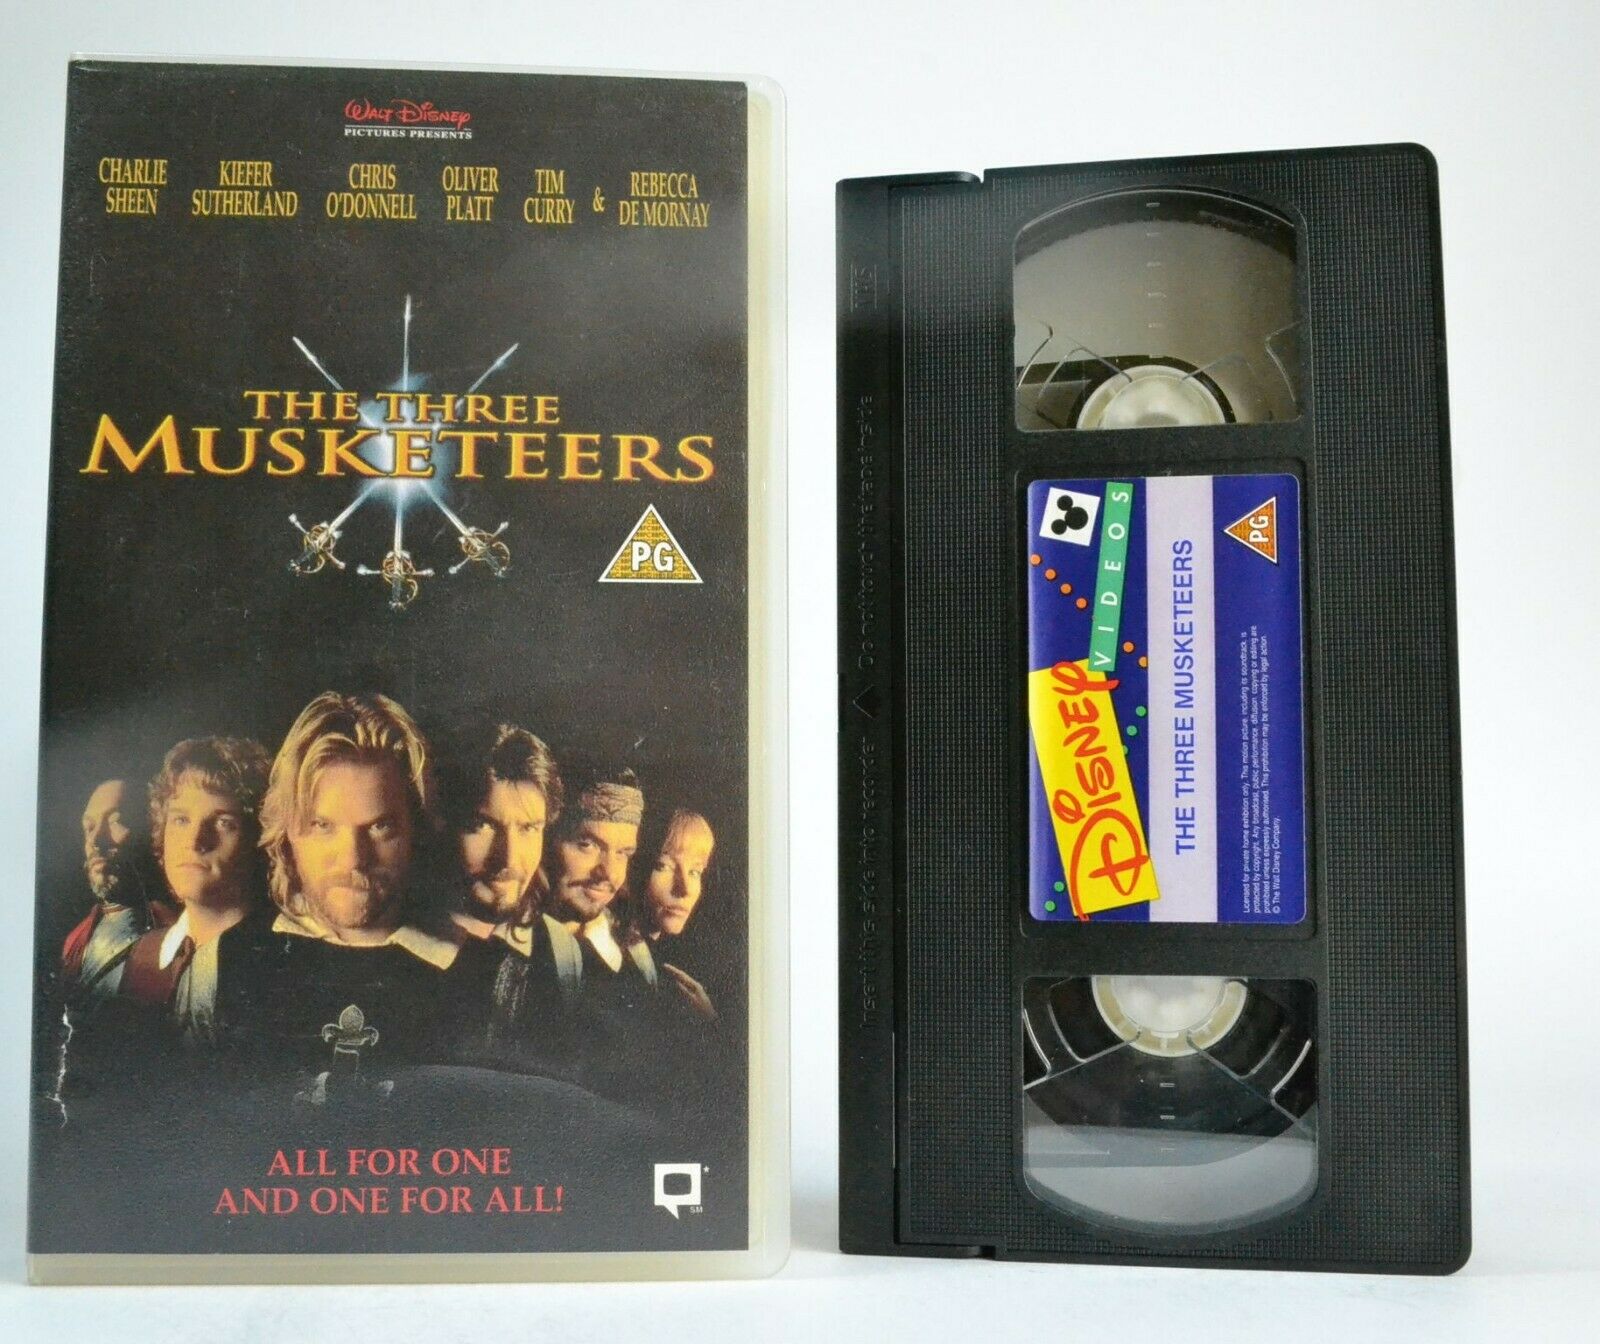 The The Musketeers: (1993) Walt Disney - Action/Adventure - Charlie Sheen - VHS-